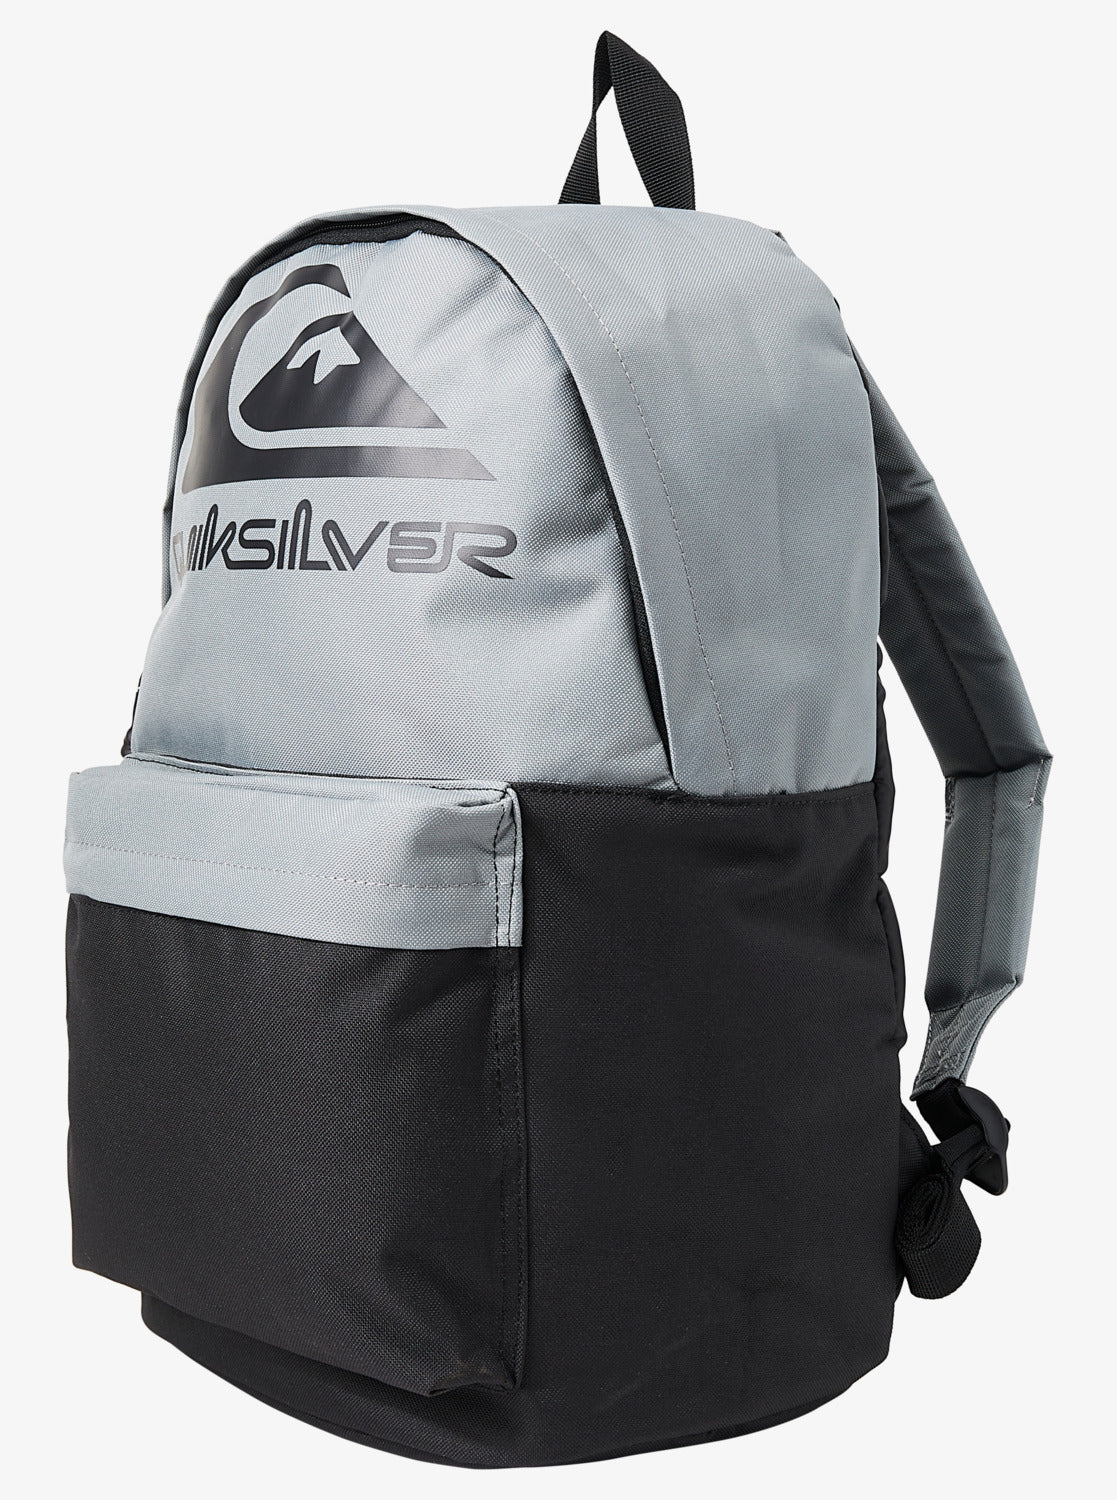 Quiksilver The Poster 26L Medium Backpack in Black